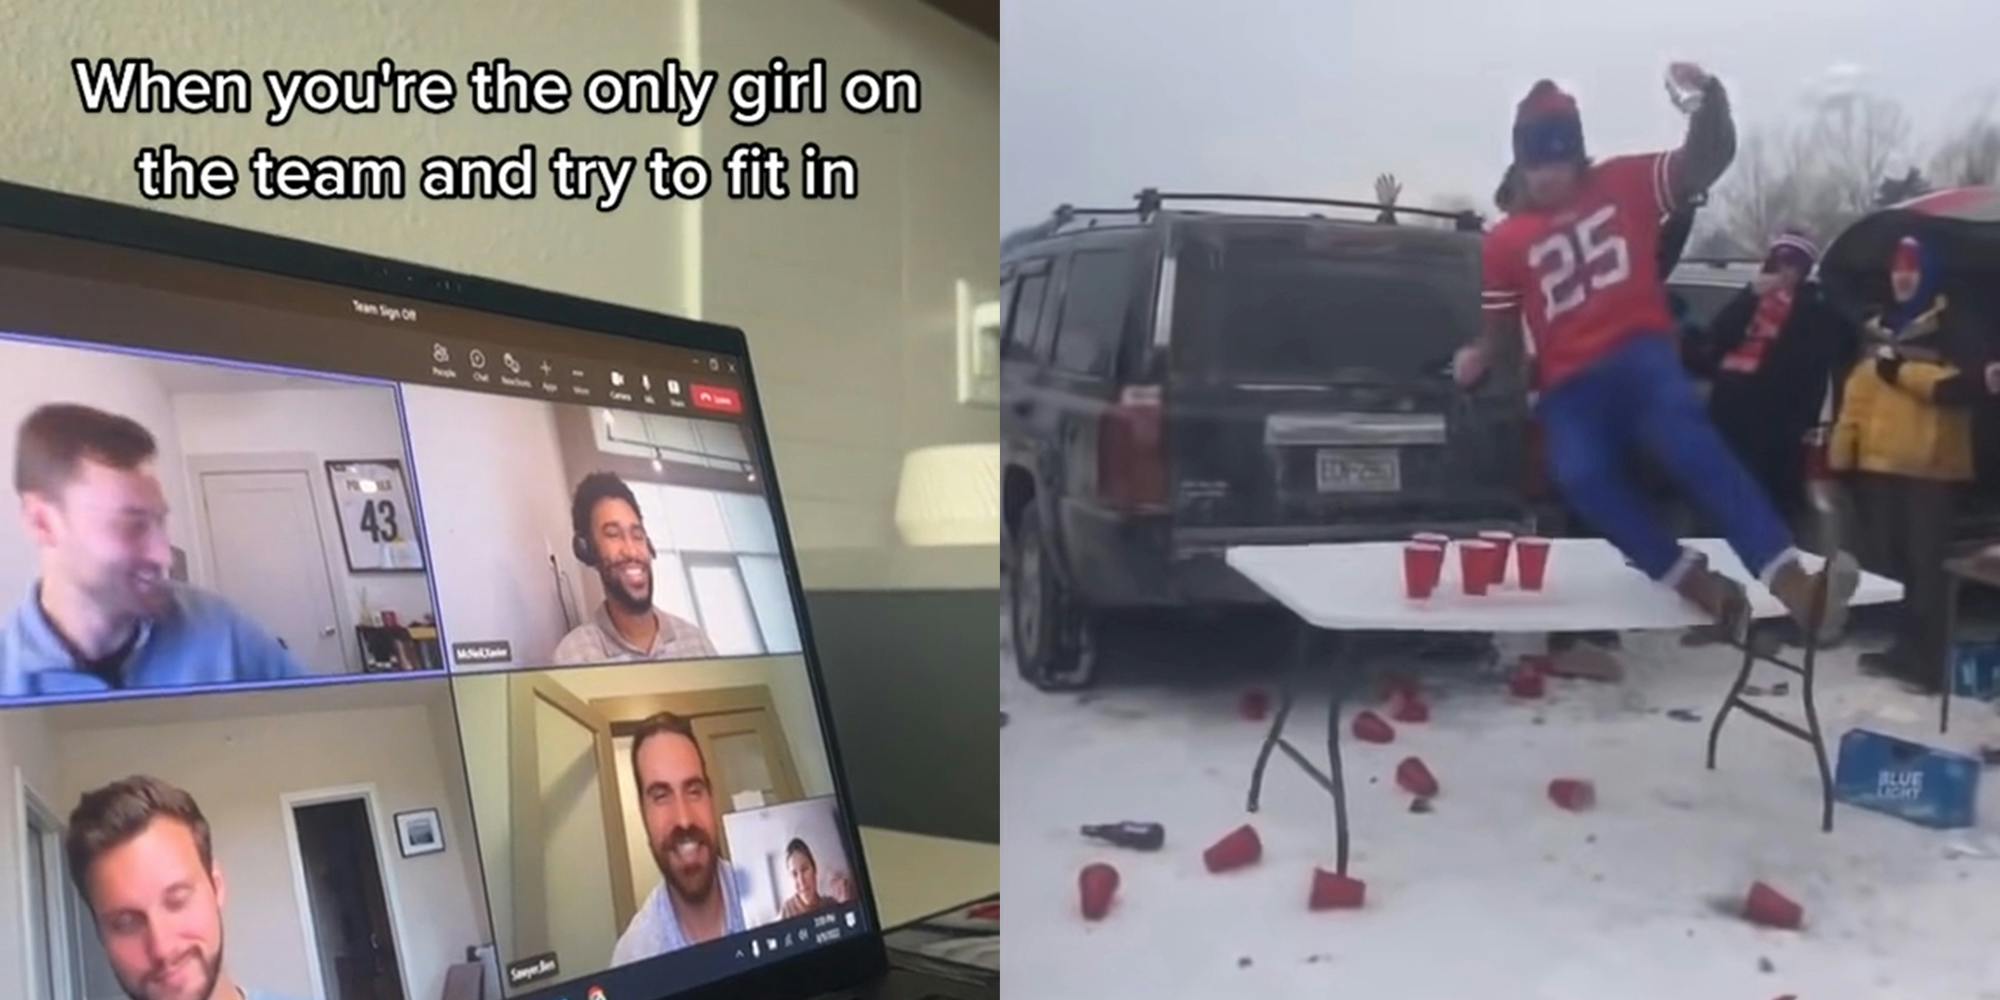 video meeting with four men and one woman captioned "When you're the only girl on the team and try to fit in" (l) man in Buffalo Bills gear jumping onto folding table from car (r)